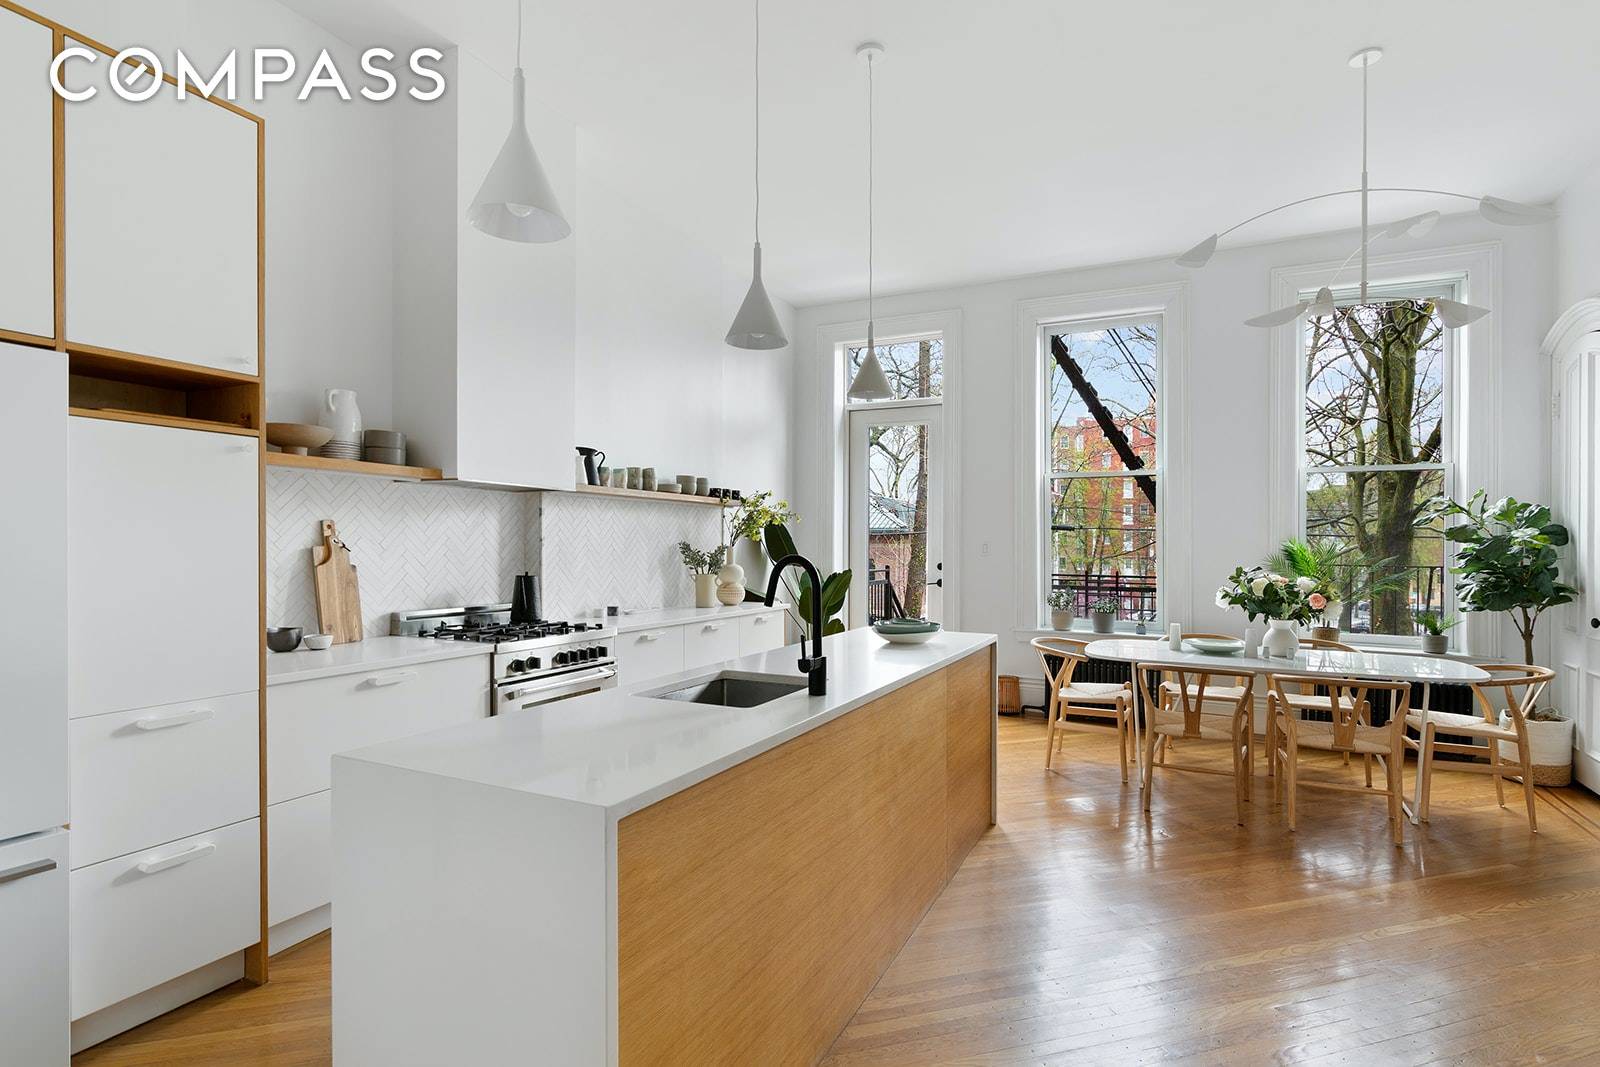 This gorgeous, 4280sqft townhouse offers the Brooklyn brownstone dream of stylish living with very high rental income.